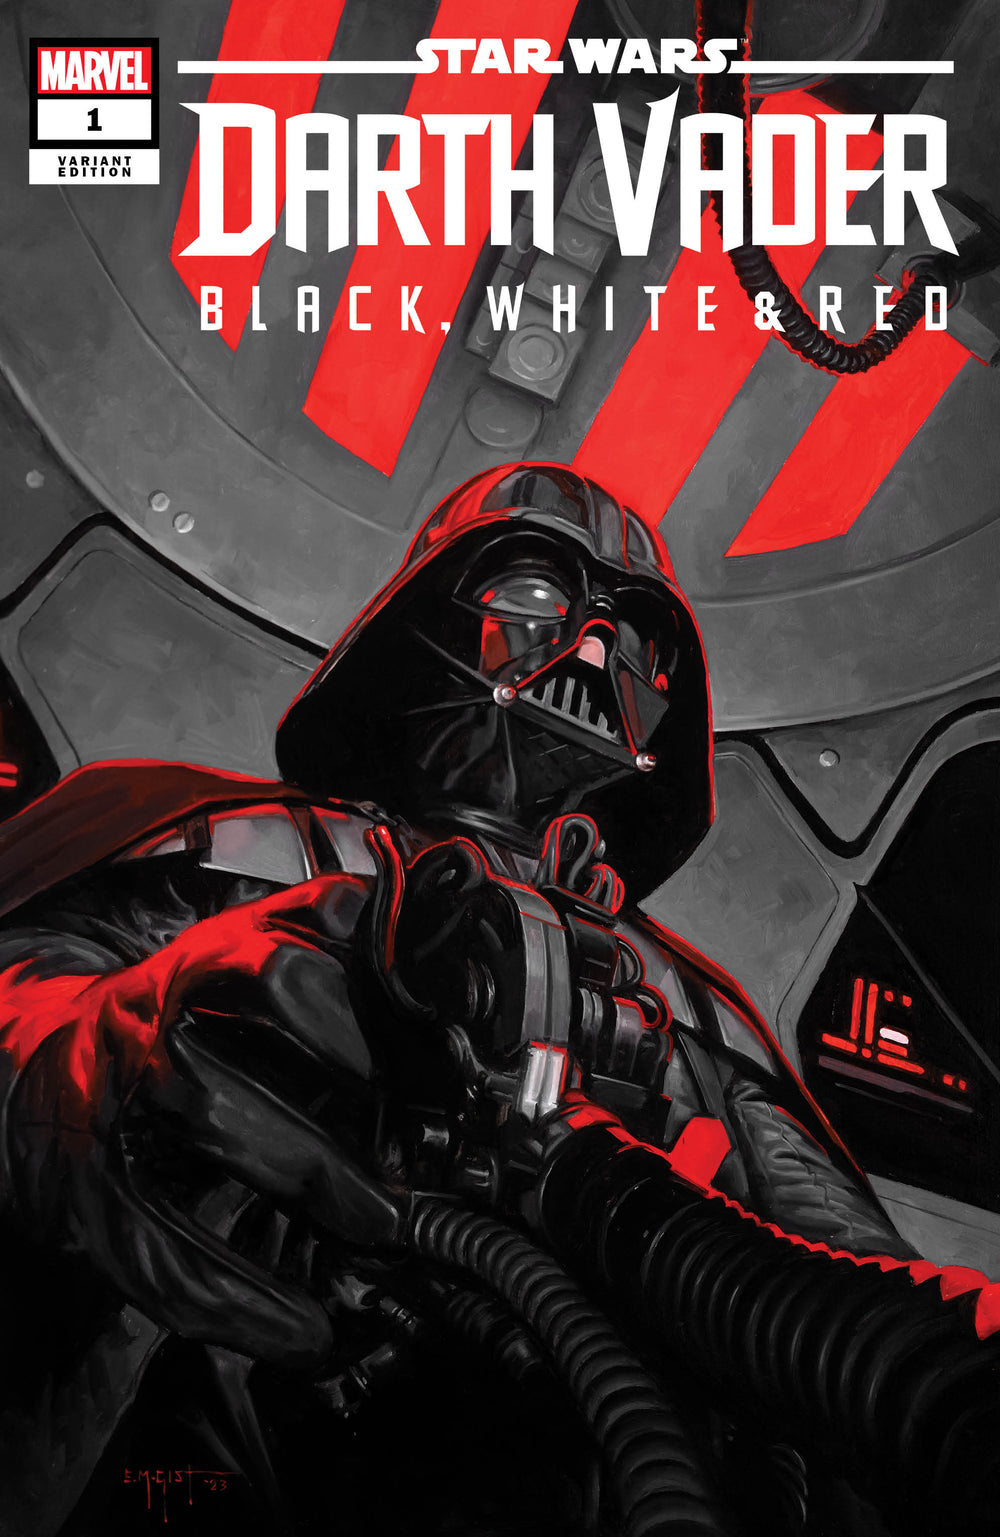 DARTH VADER BLACK, WHITE & RED #1 Gist Trade Dress Exclusive! (Ltd to 800 with COA)